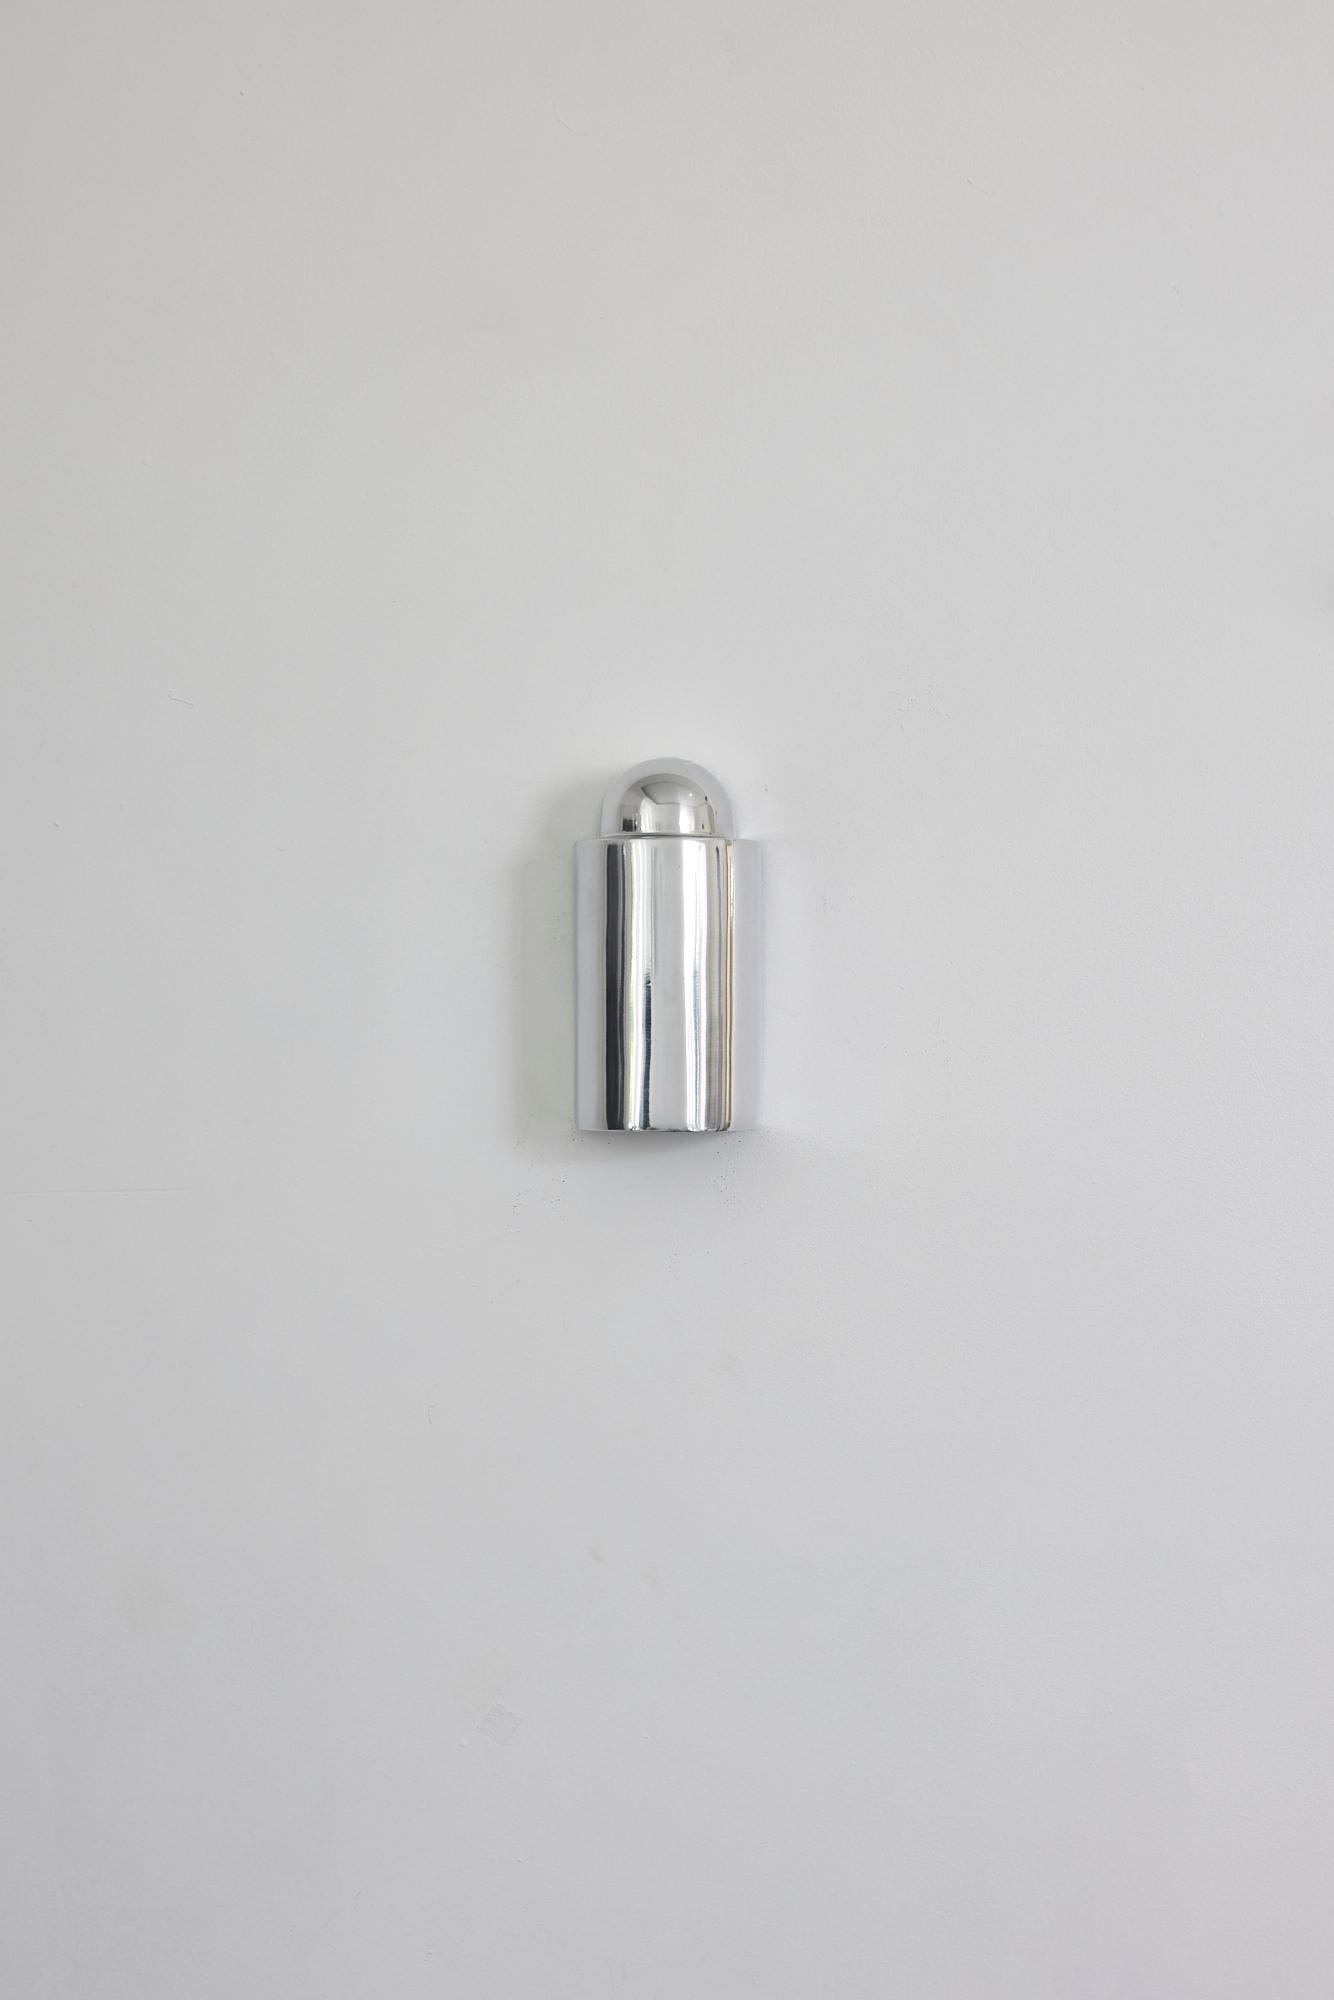 Organic Modern Decade Wall Light, Polished by Dunlin For Sale